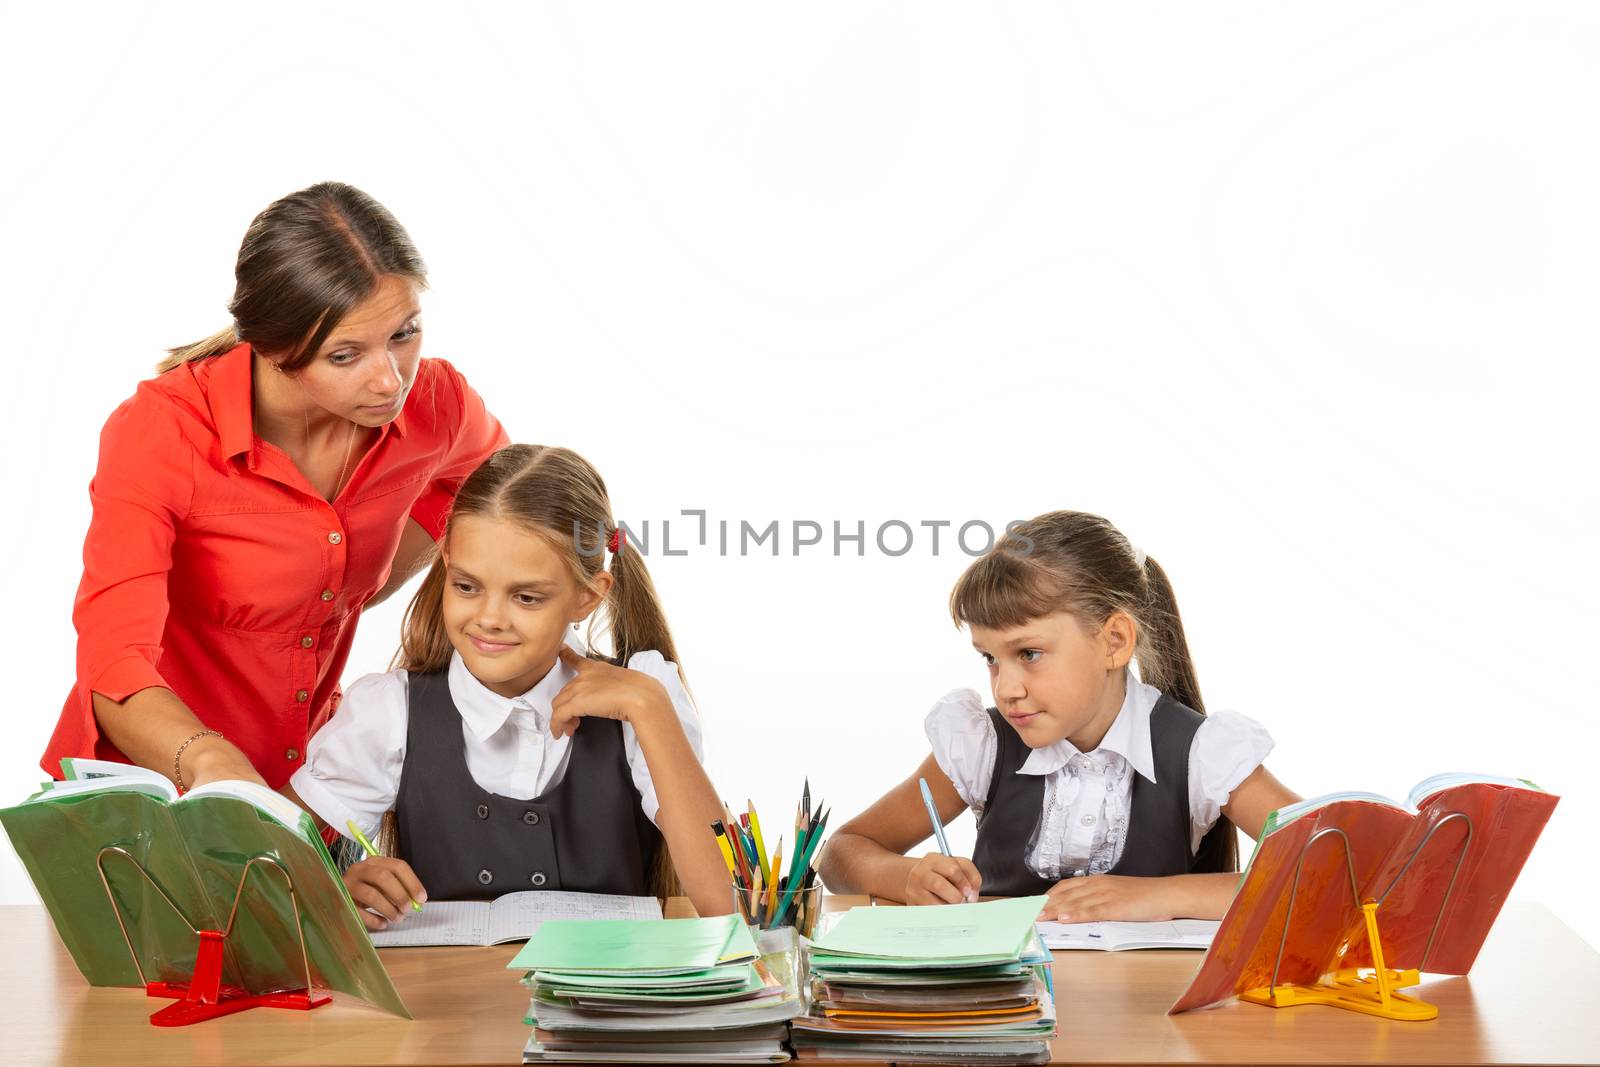 The teacher helps to understand the task of the student